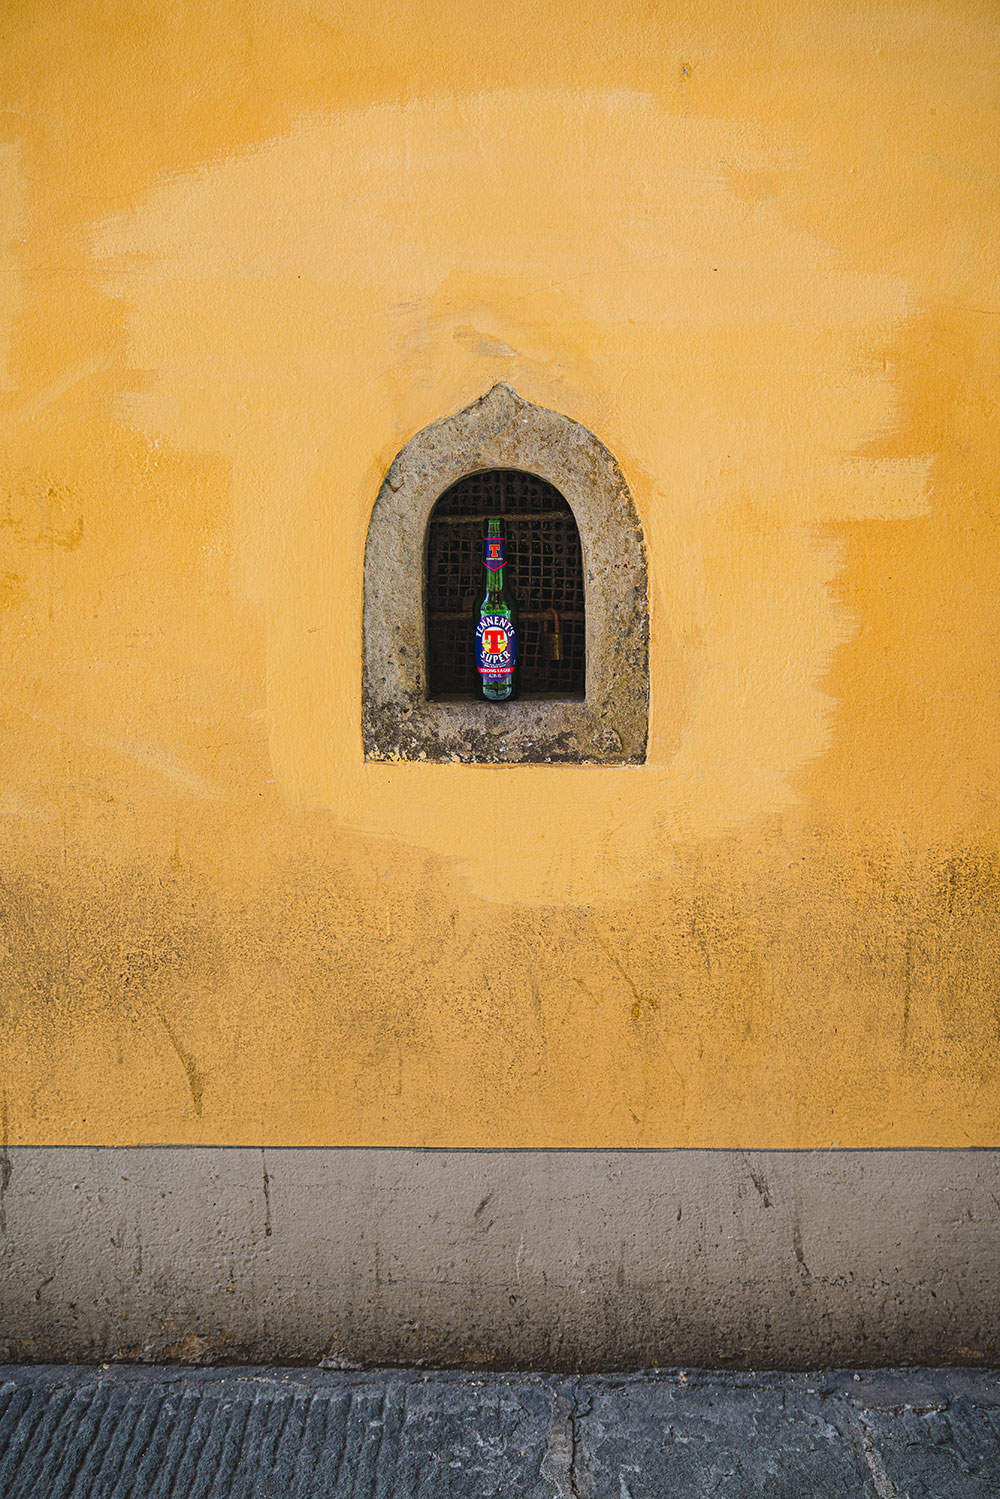 A bottle sits in a a wine window in Florence, Italy in a yellow wall